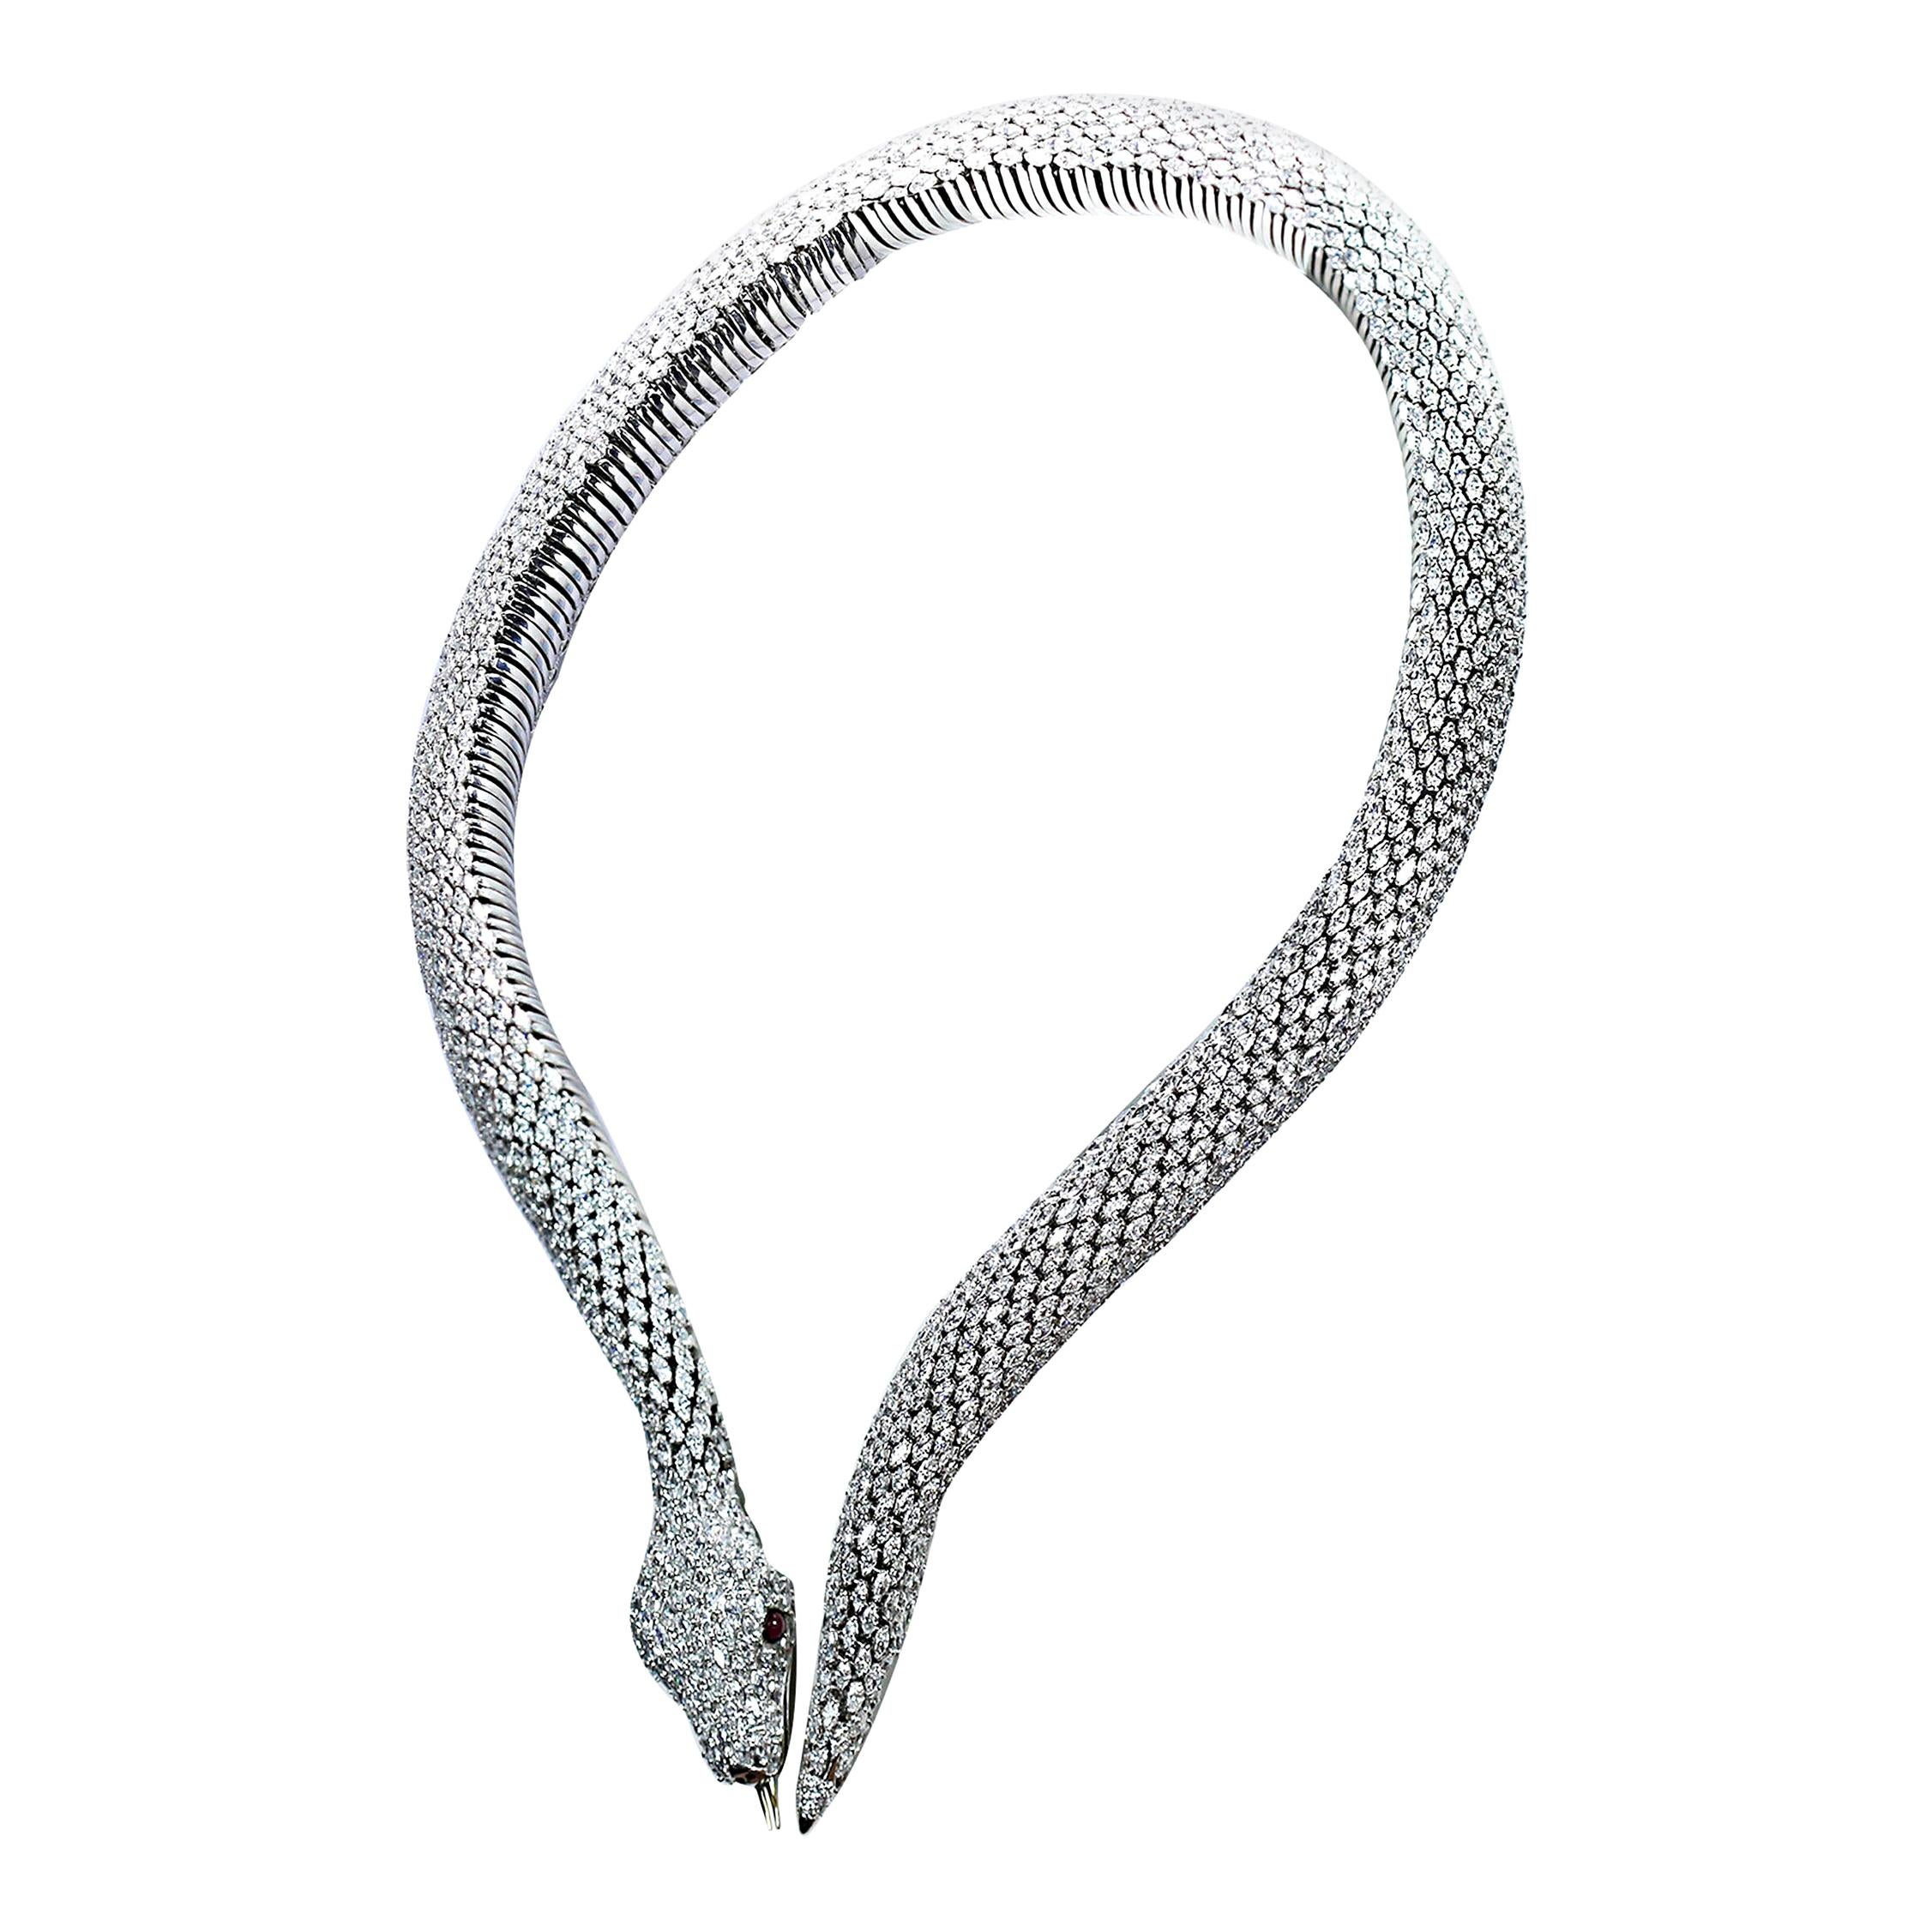 Studio Rêves Marquise Snake Spring Collar Necklace 18 Karat White Gold In New Condition For Sale In Mumbai, Maharashtra